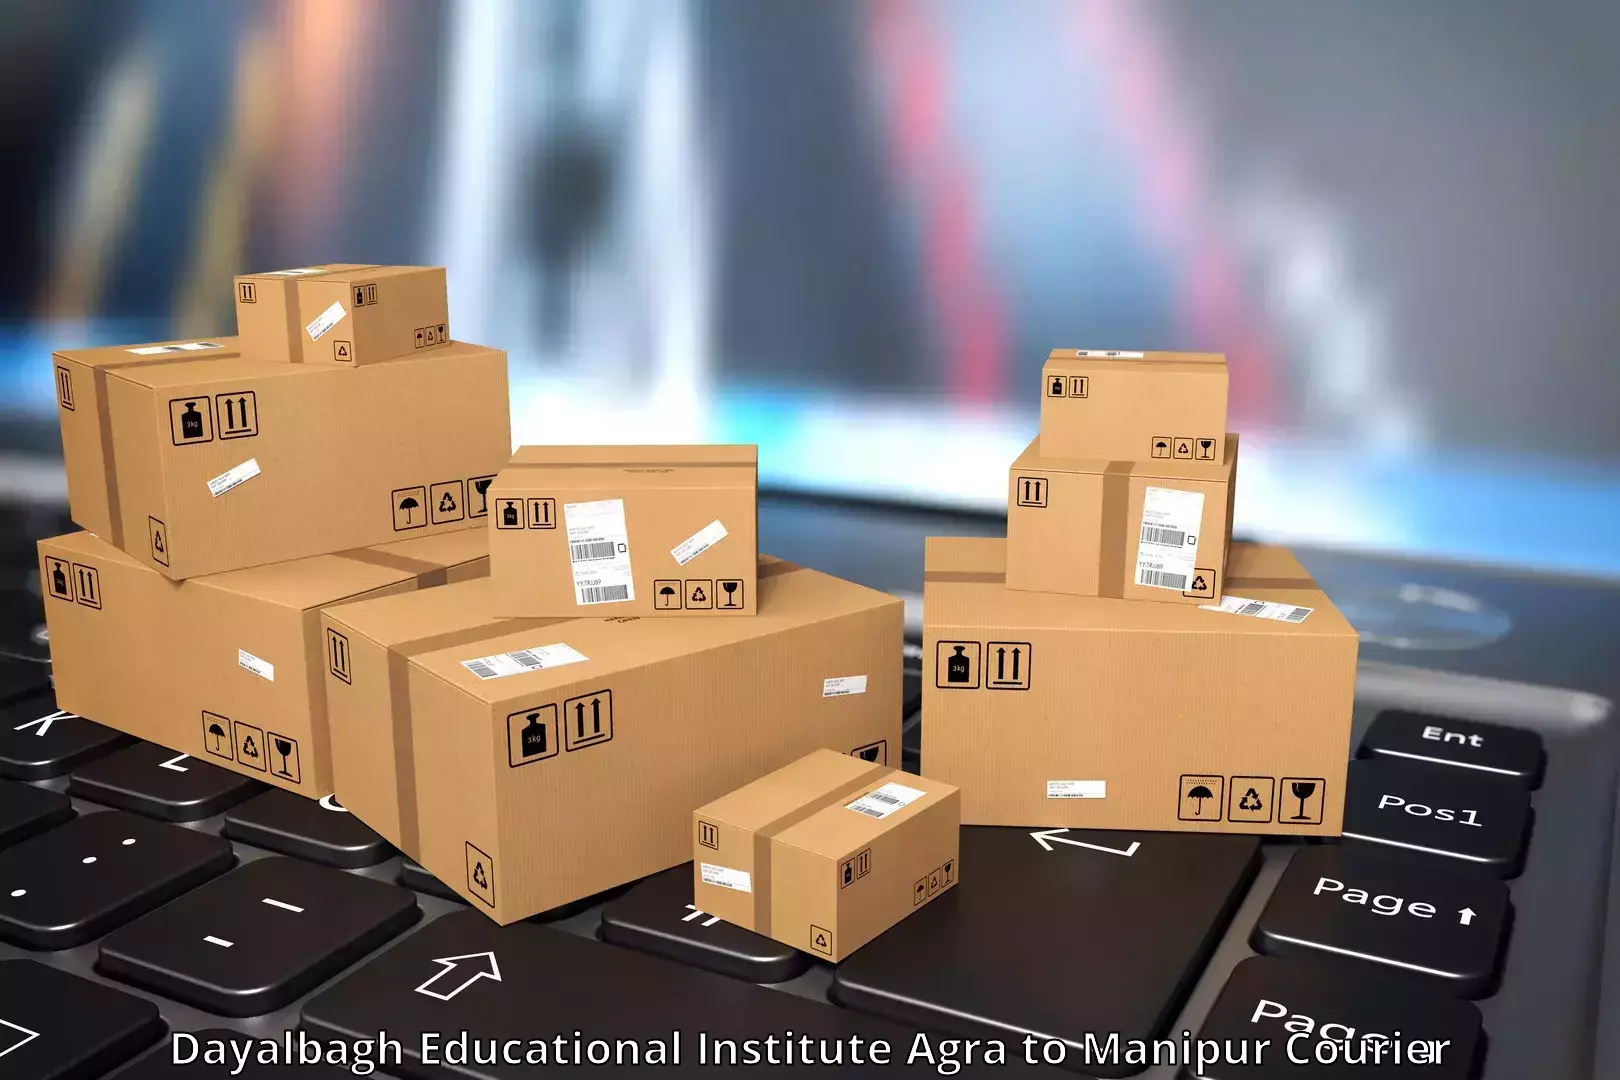 Comprehensive logistics solutions Dayalbagh Educational Institute Agra to Moirang